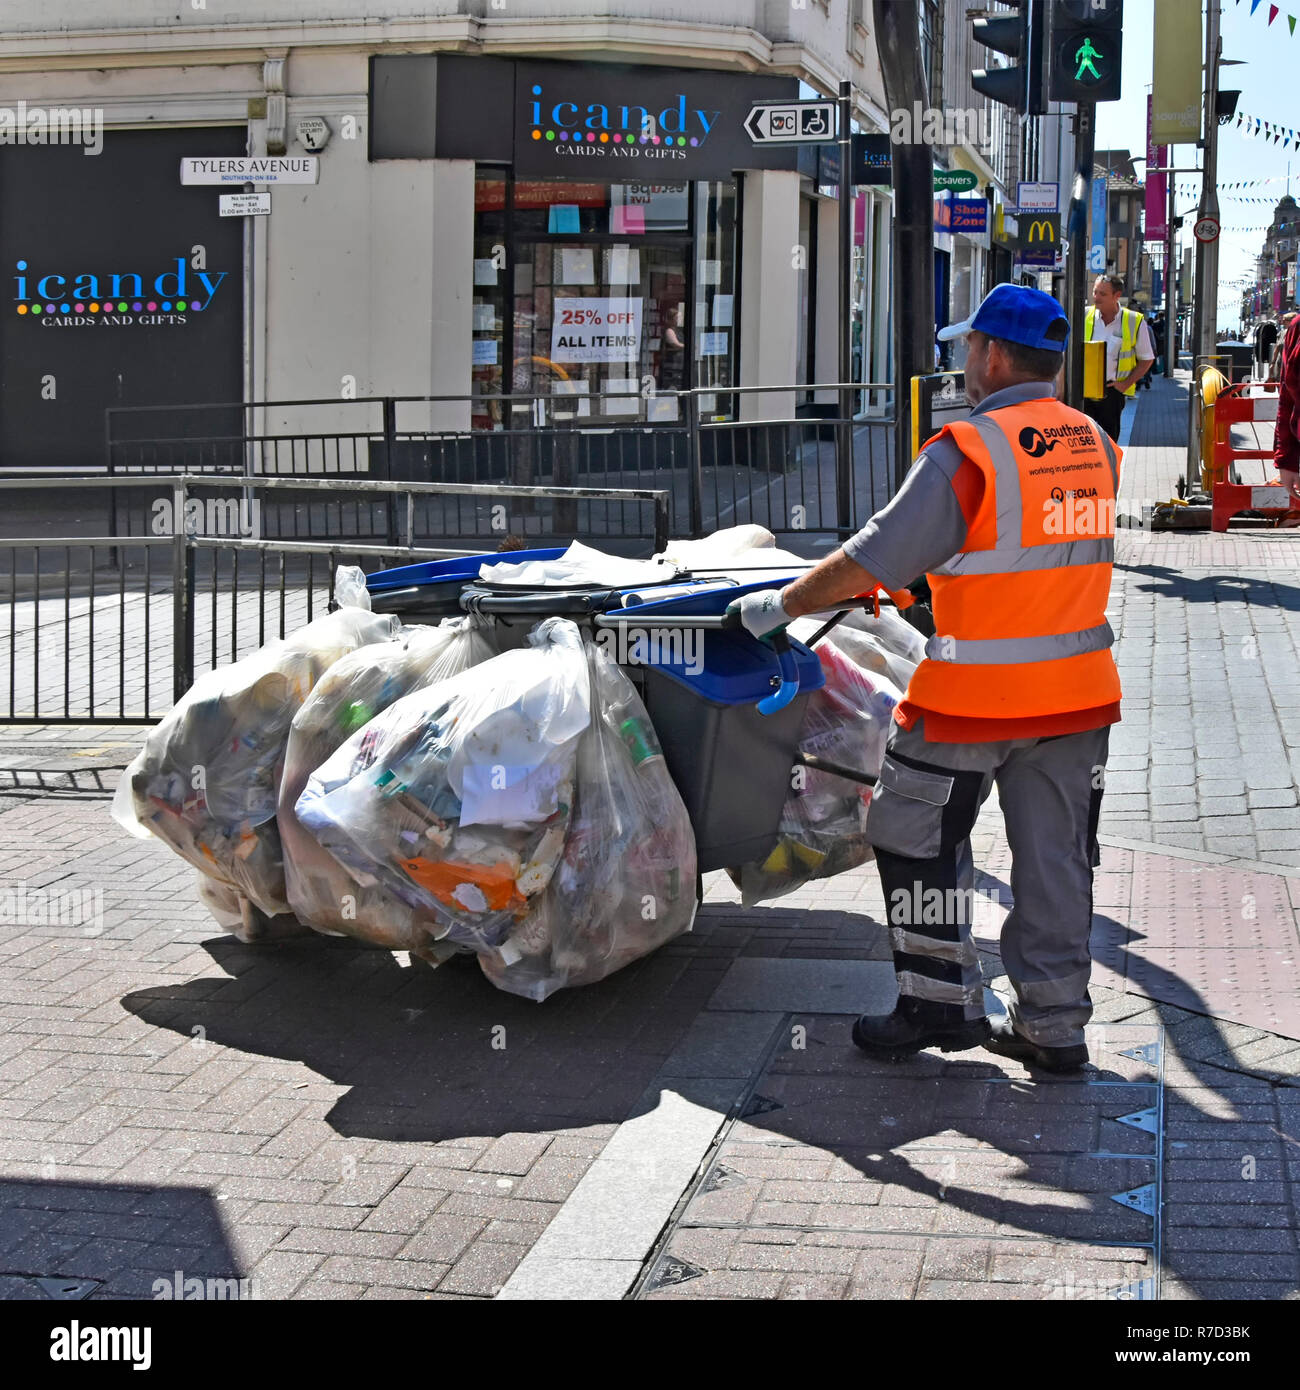 Bins sacks & bags full of litter rubbish on garbage hand cart in shopping street pushed by council worker collected from seaside resort pavement bins Stock Photo